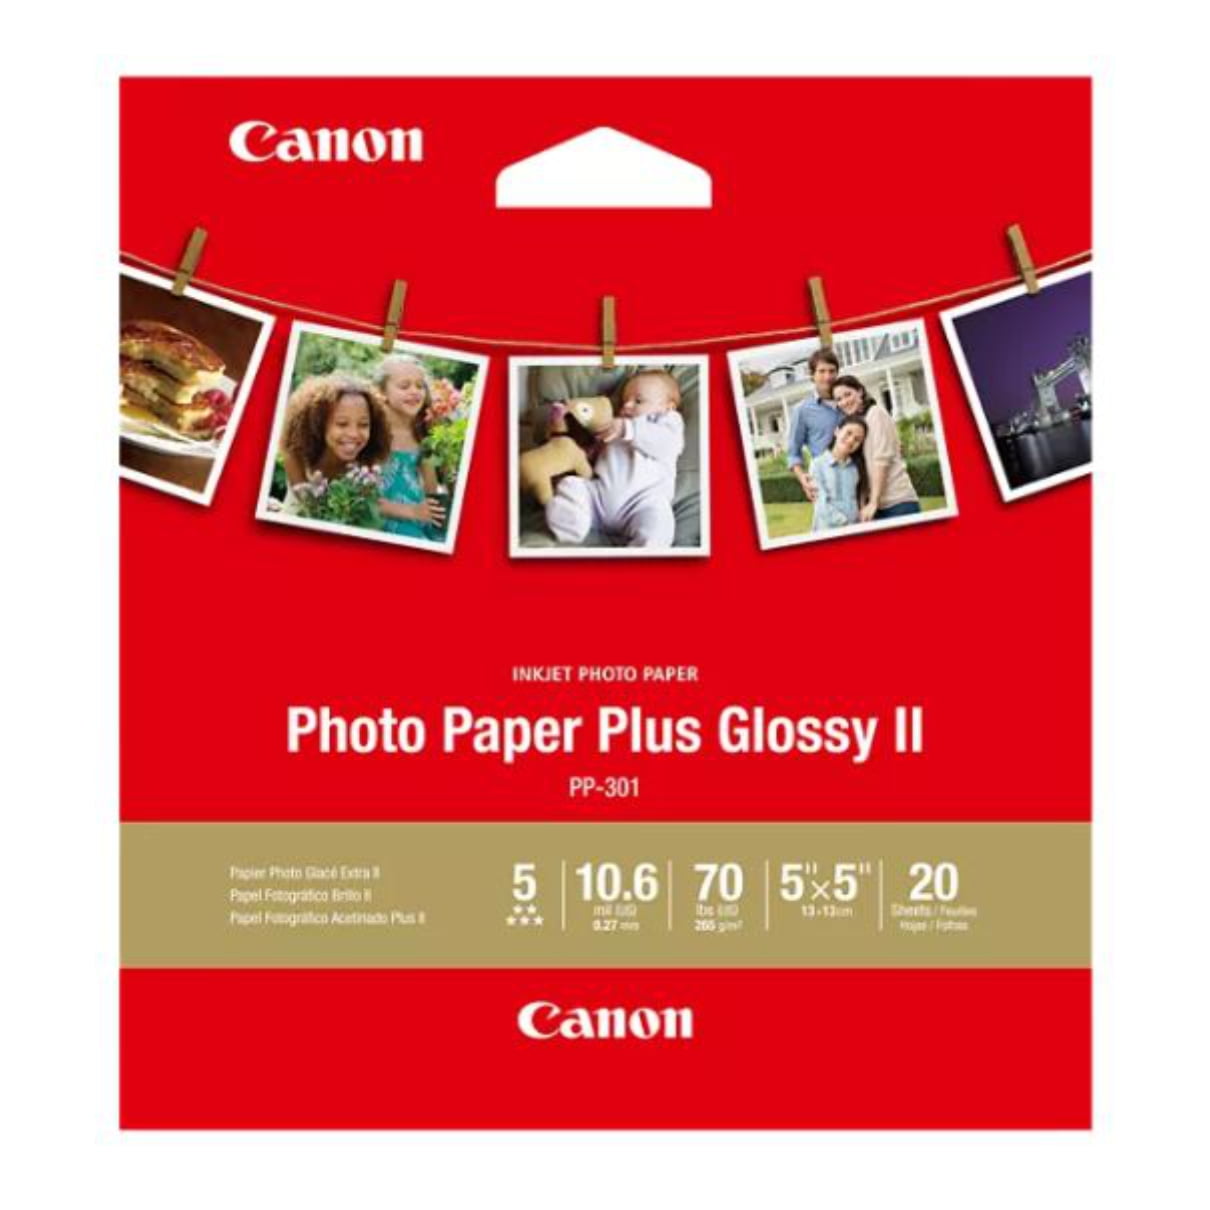 Canon 5x5 Glossy Photo Paper - 20 Sheets